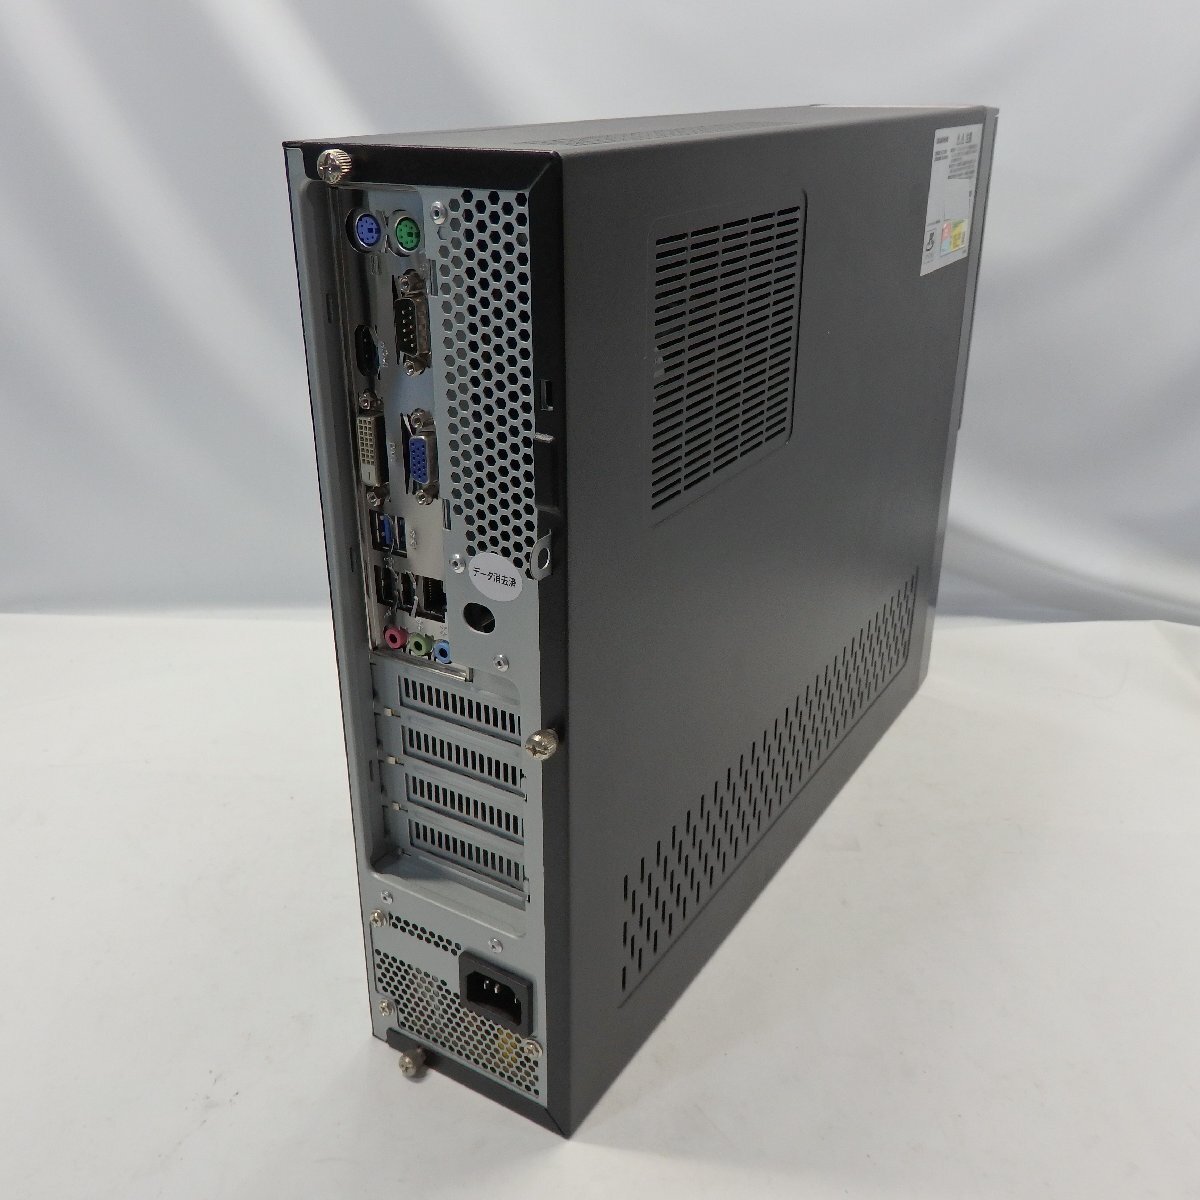 FRONTIER FRBSH5212HB_NO1/21 Core i5-8400 2.8GHz/8GB/HDD500GB/DVDマルチ/OS無/動作未確認【栃木出荷】の画像3